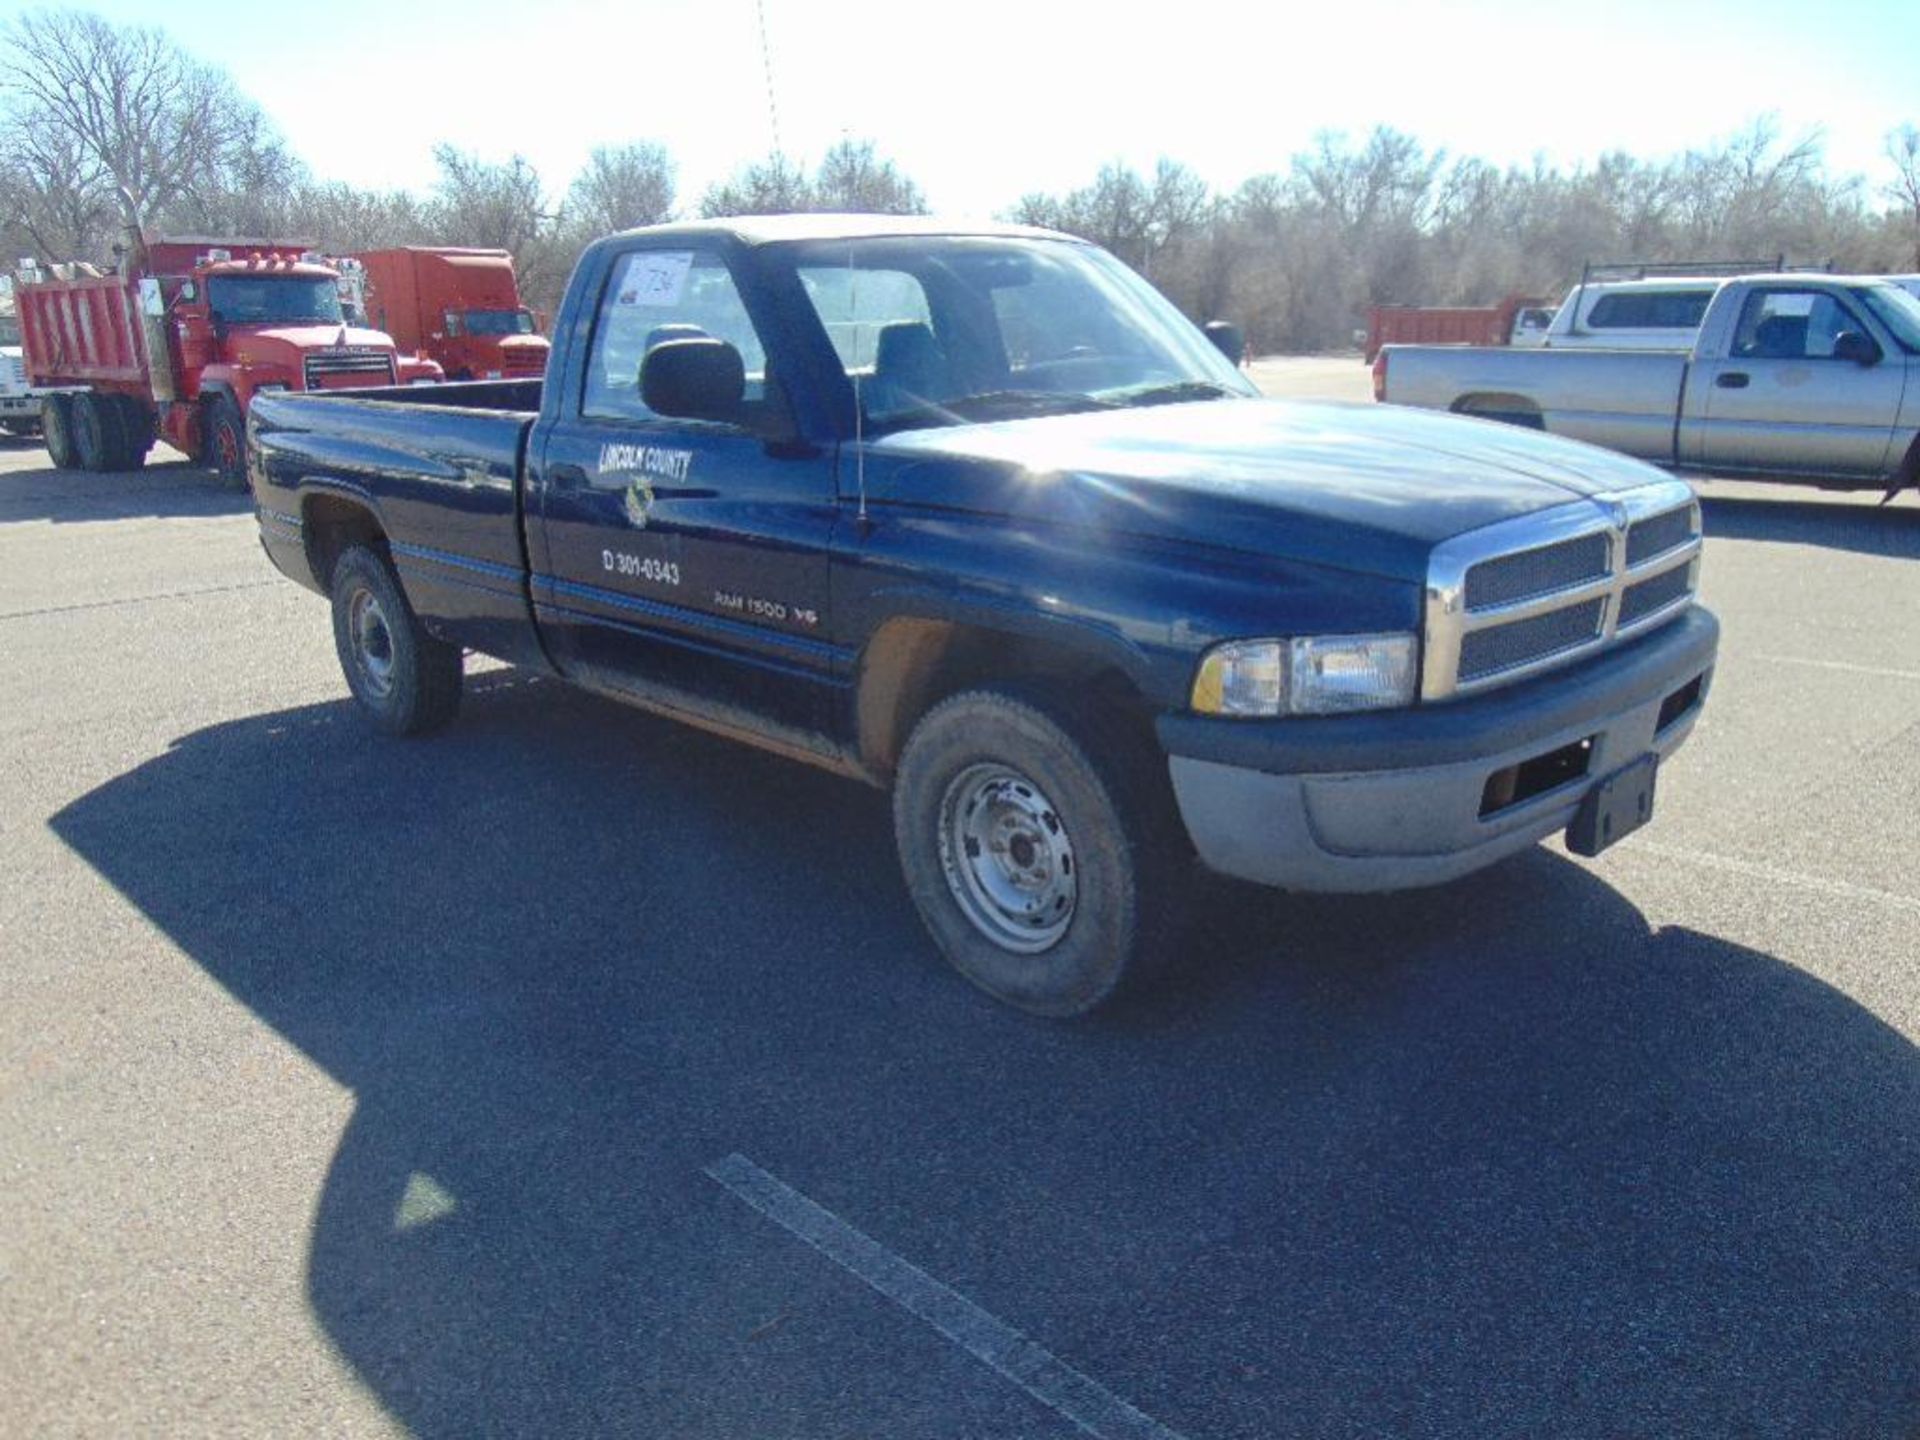 2001 Dodge Ram 1500 Pickup s/n 1b7hc16x01s334202, 3.9 v6 eng, auto trans,od reads 181794 miles, - Image 3 of 3